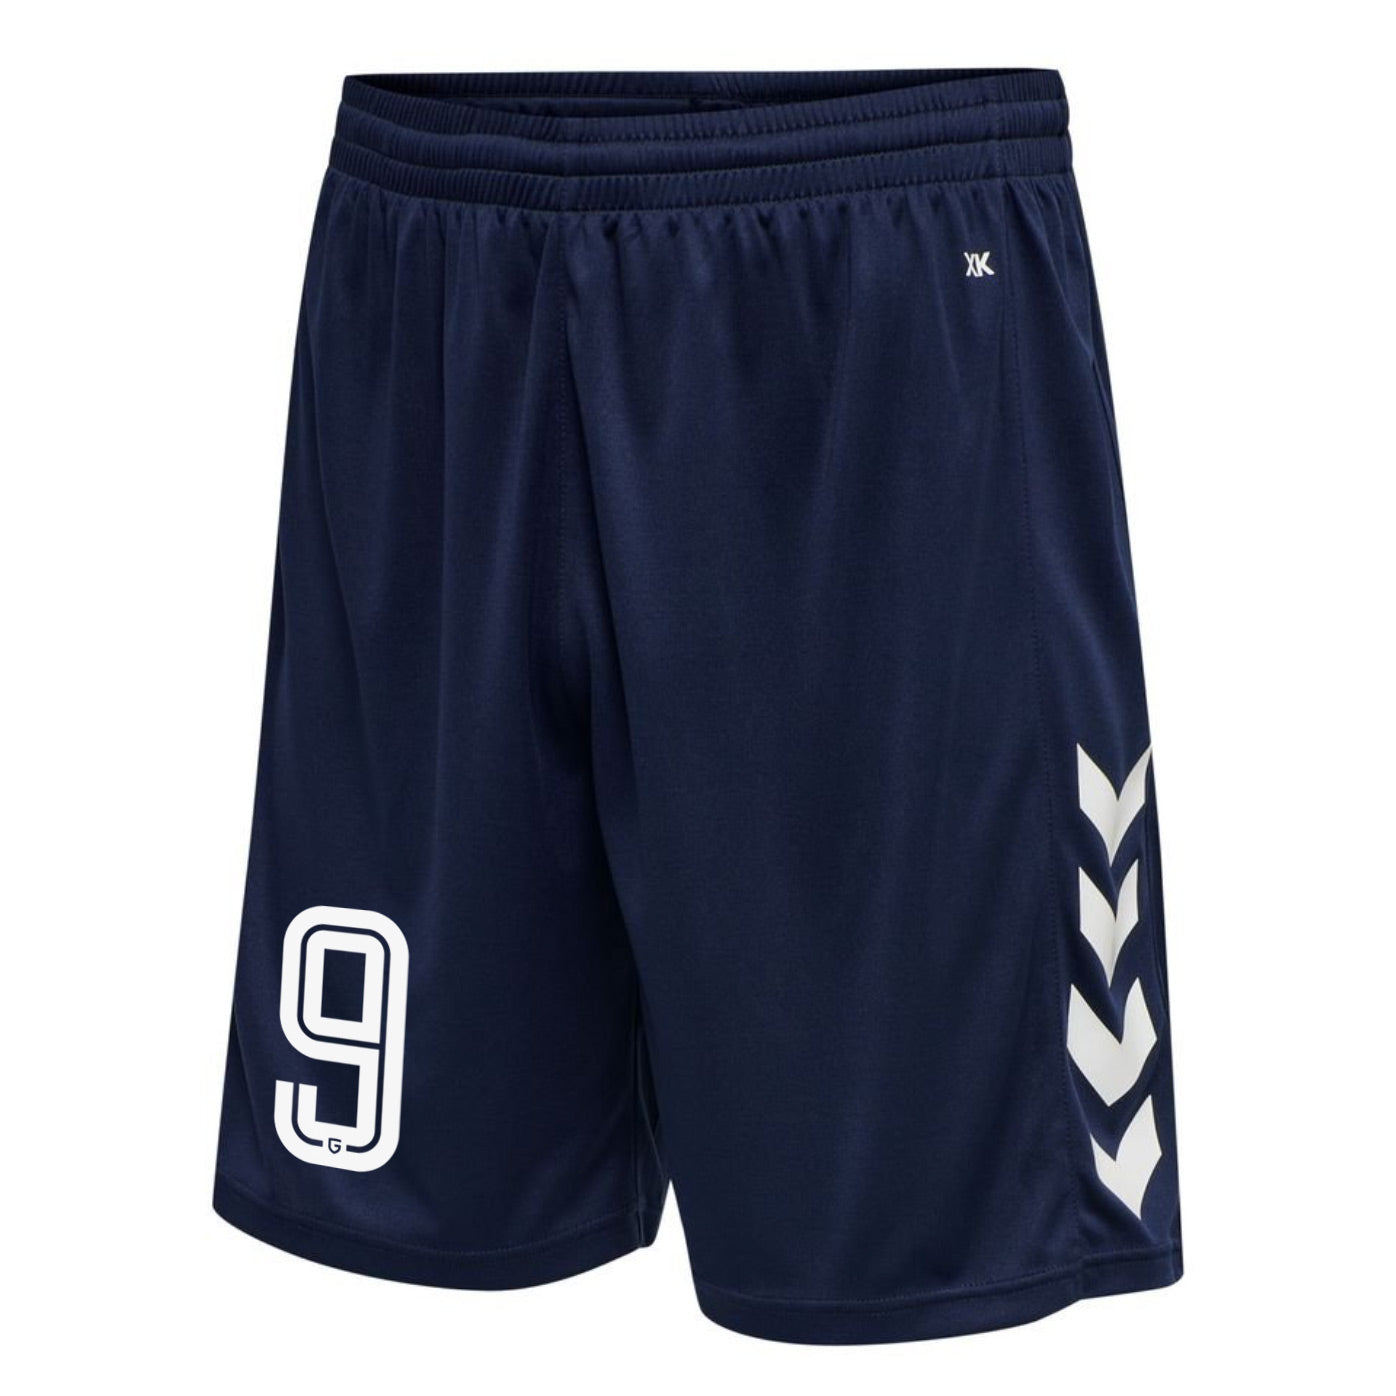 GILLA FC Official On-Field Home Kit Shorts